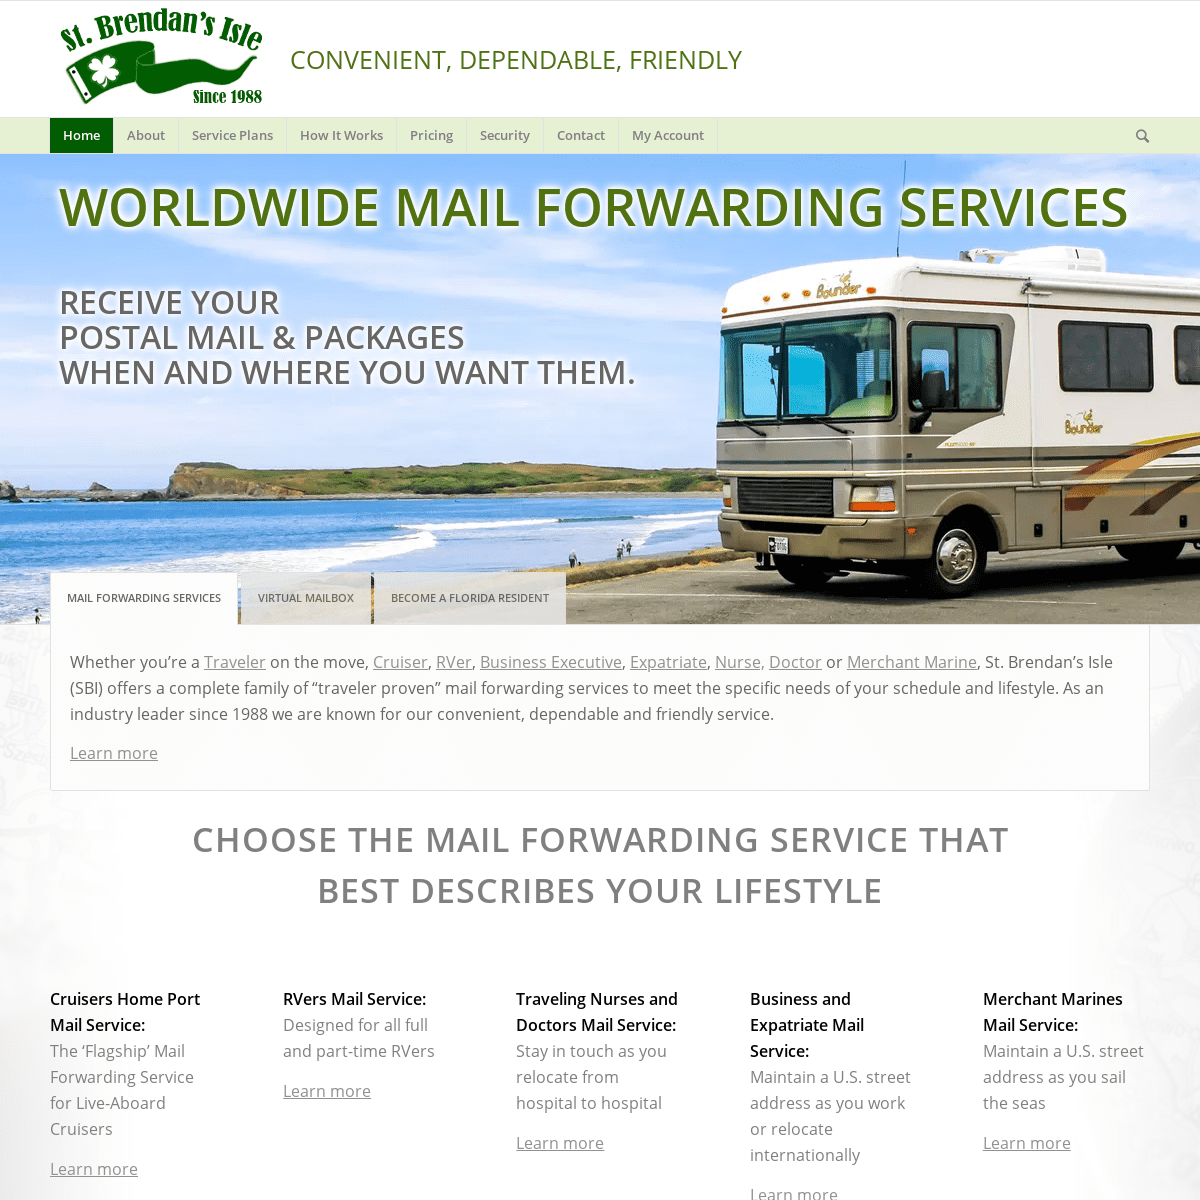 Mail Forwarding Services at St Brendan's Isle